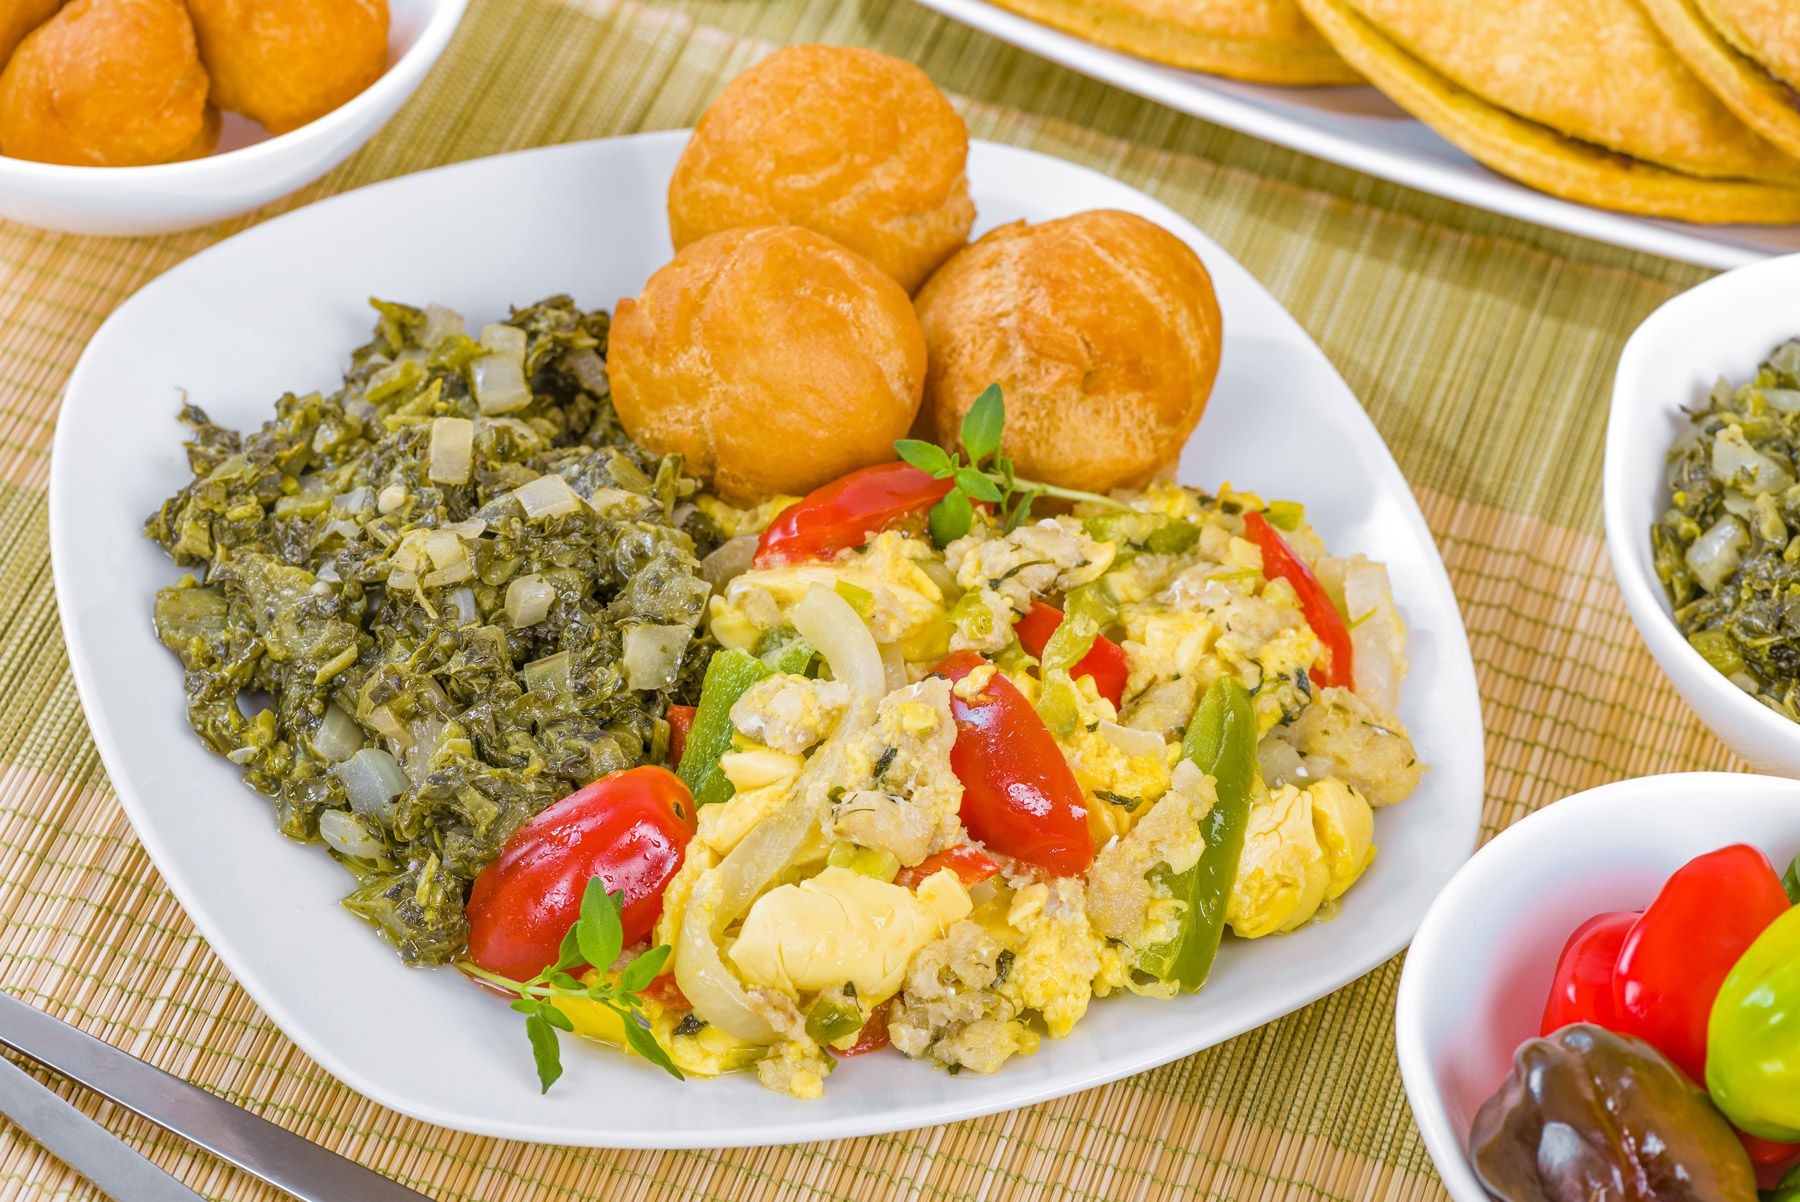 Traditional Jamaican Ackee and Saltfish